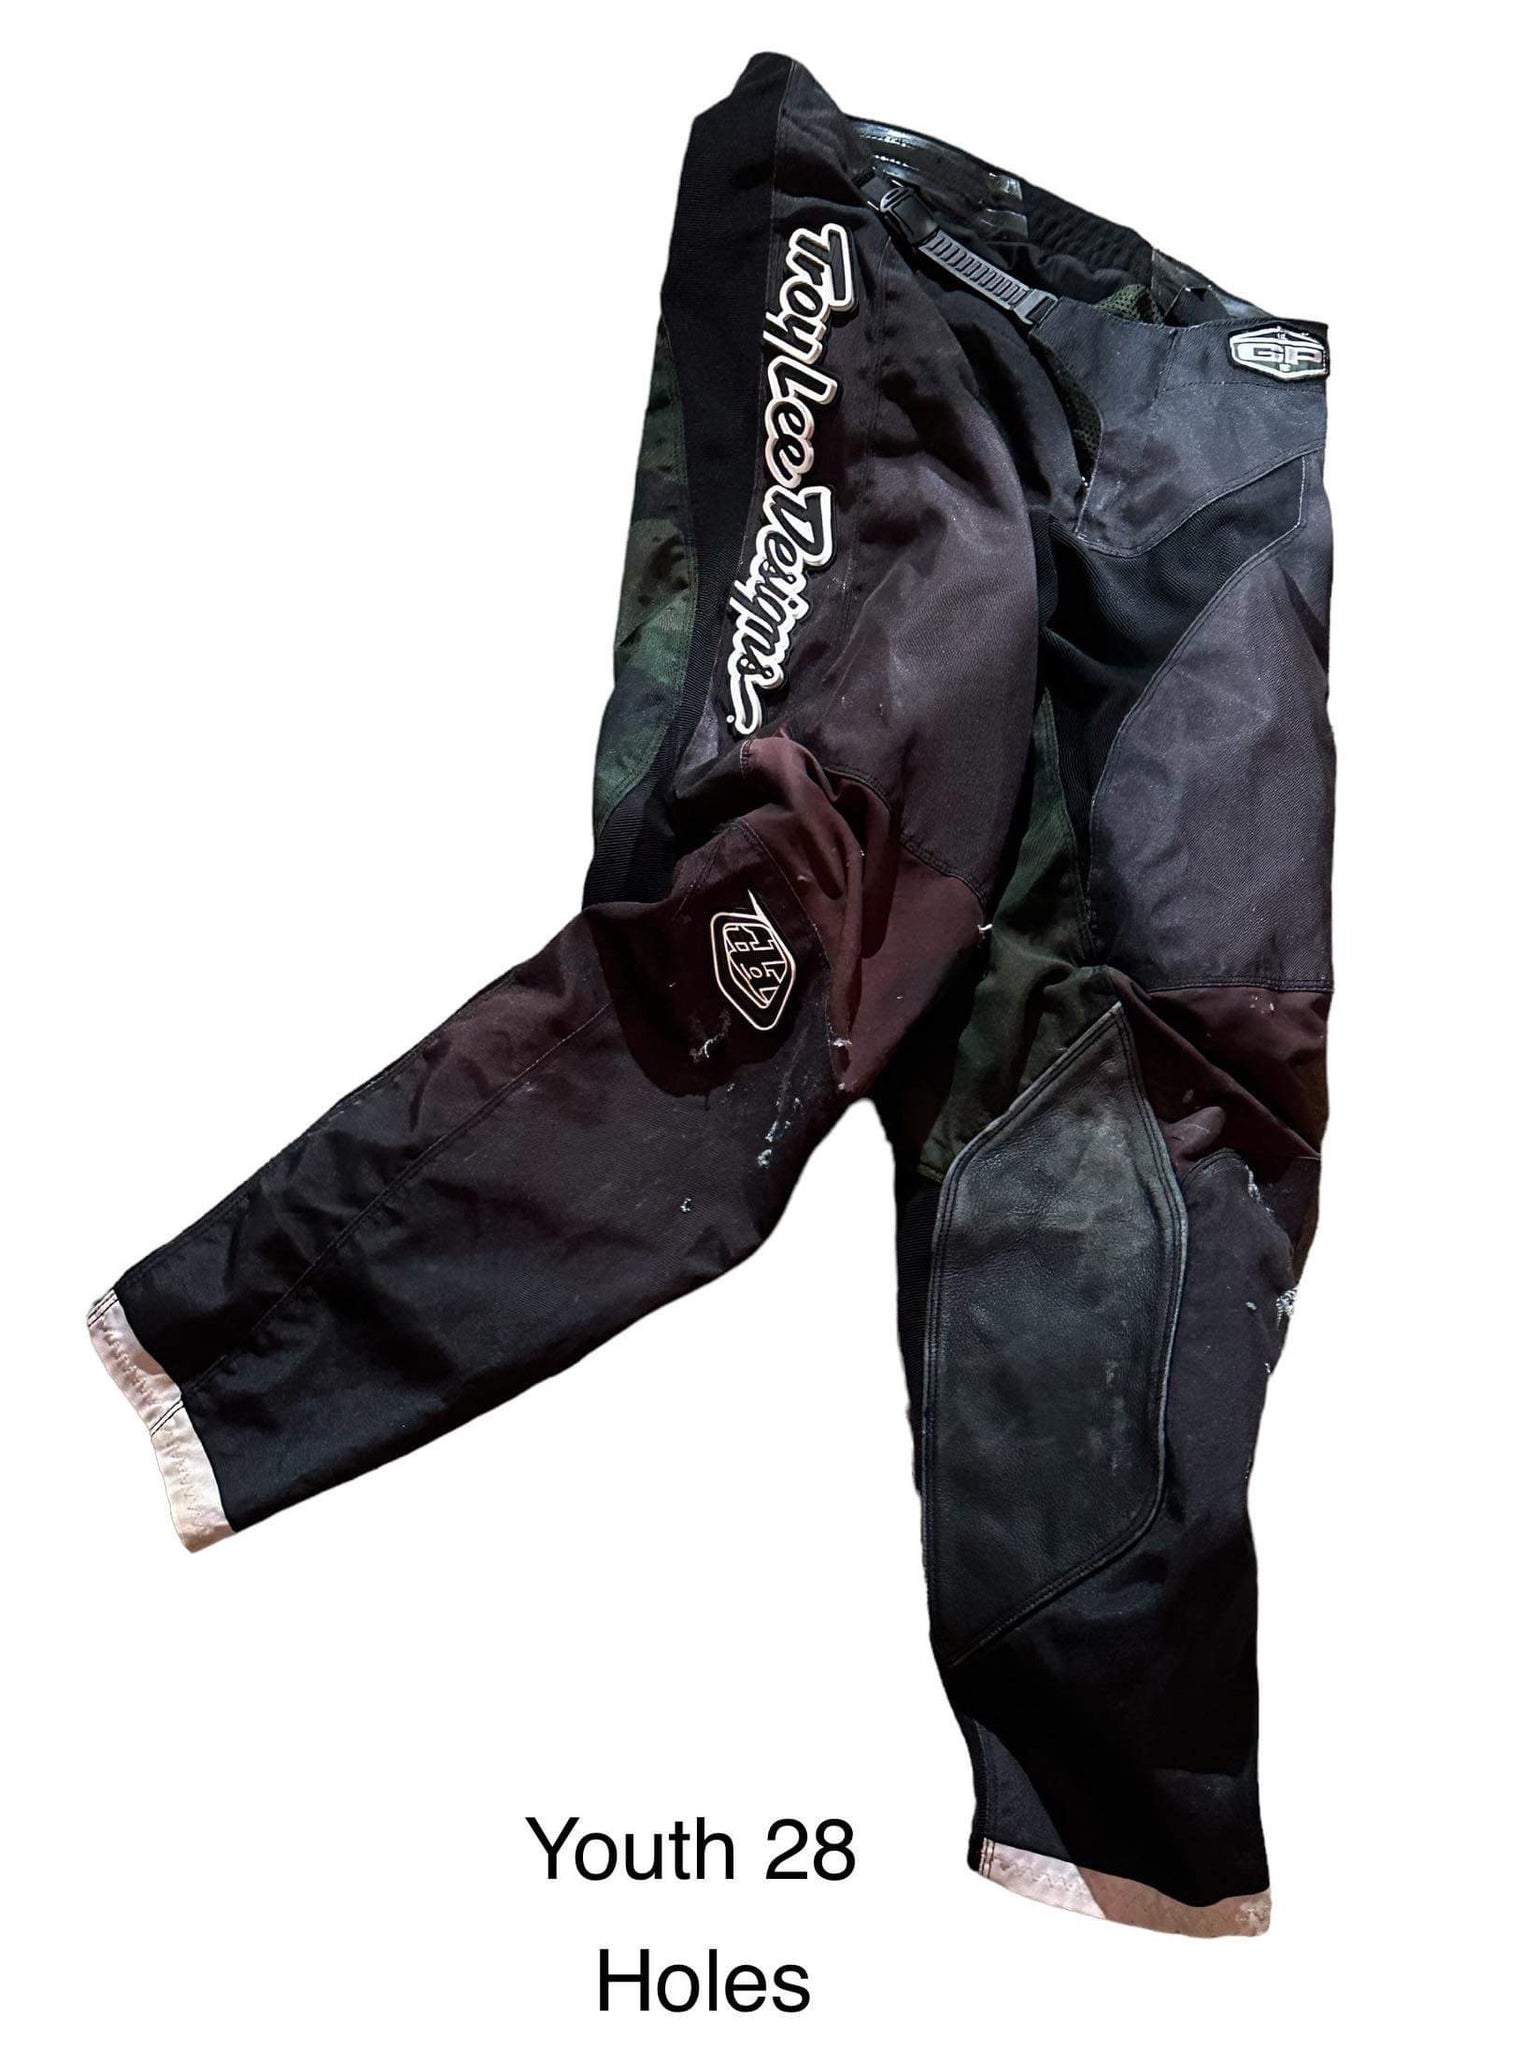 Youth Troy Lee Designs Pants Only - Size 28